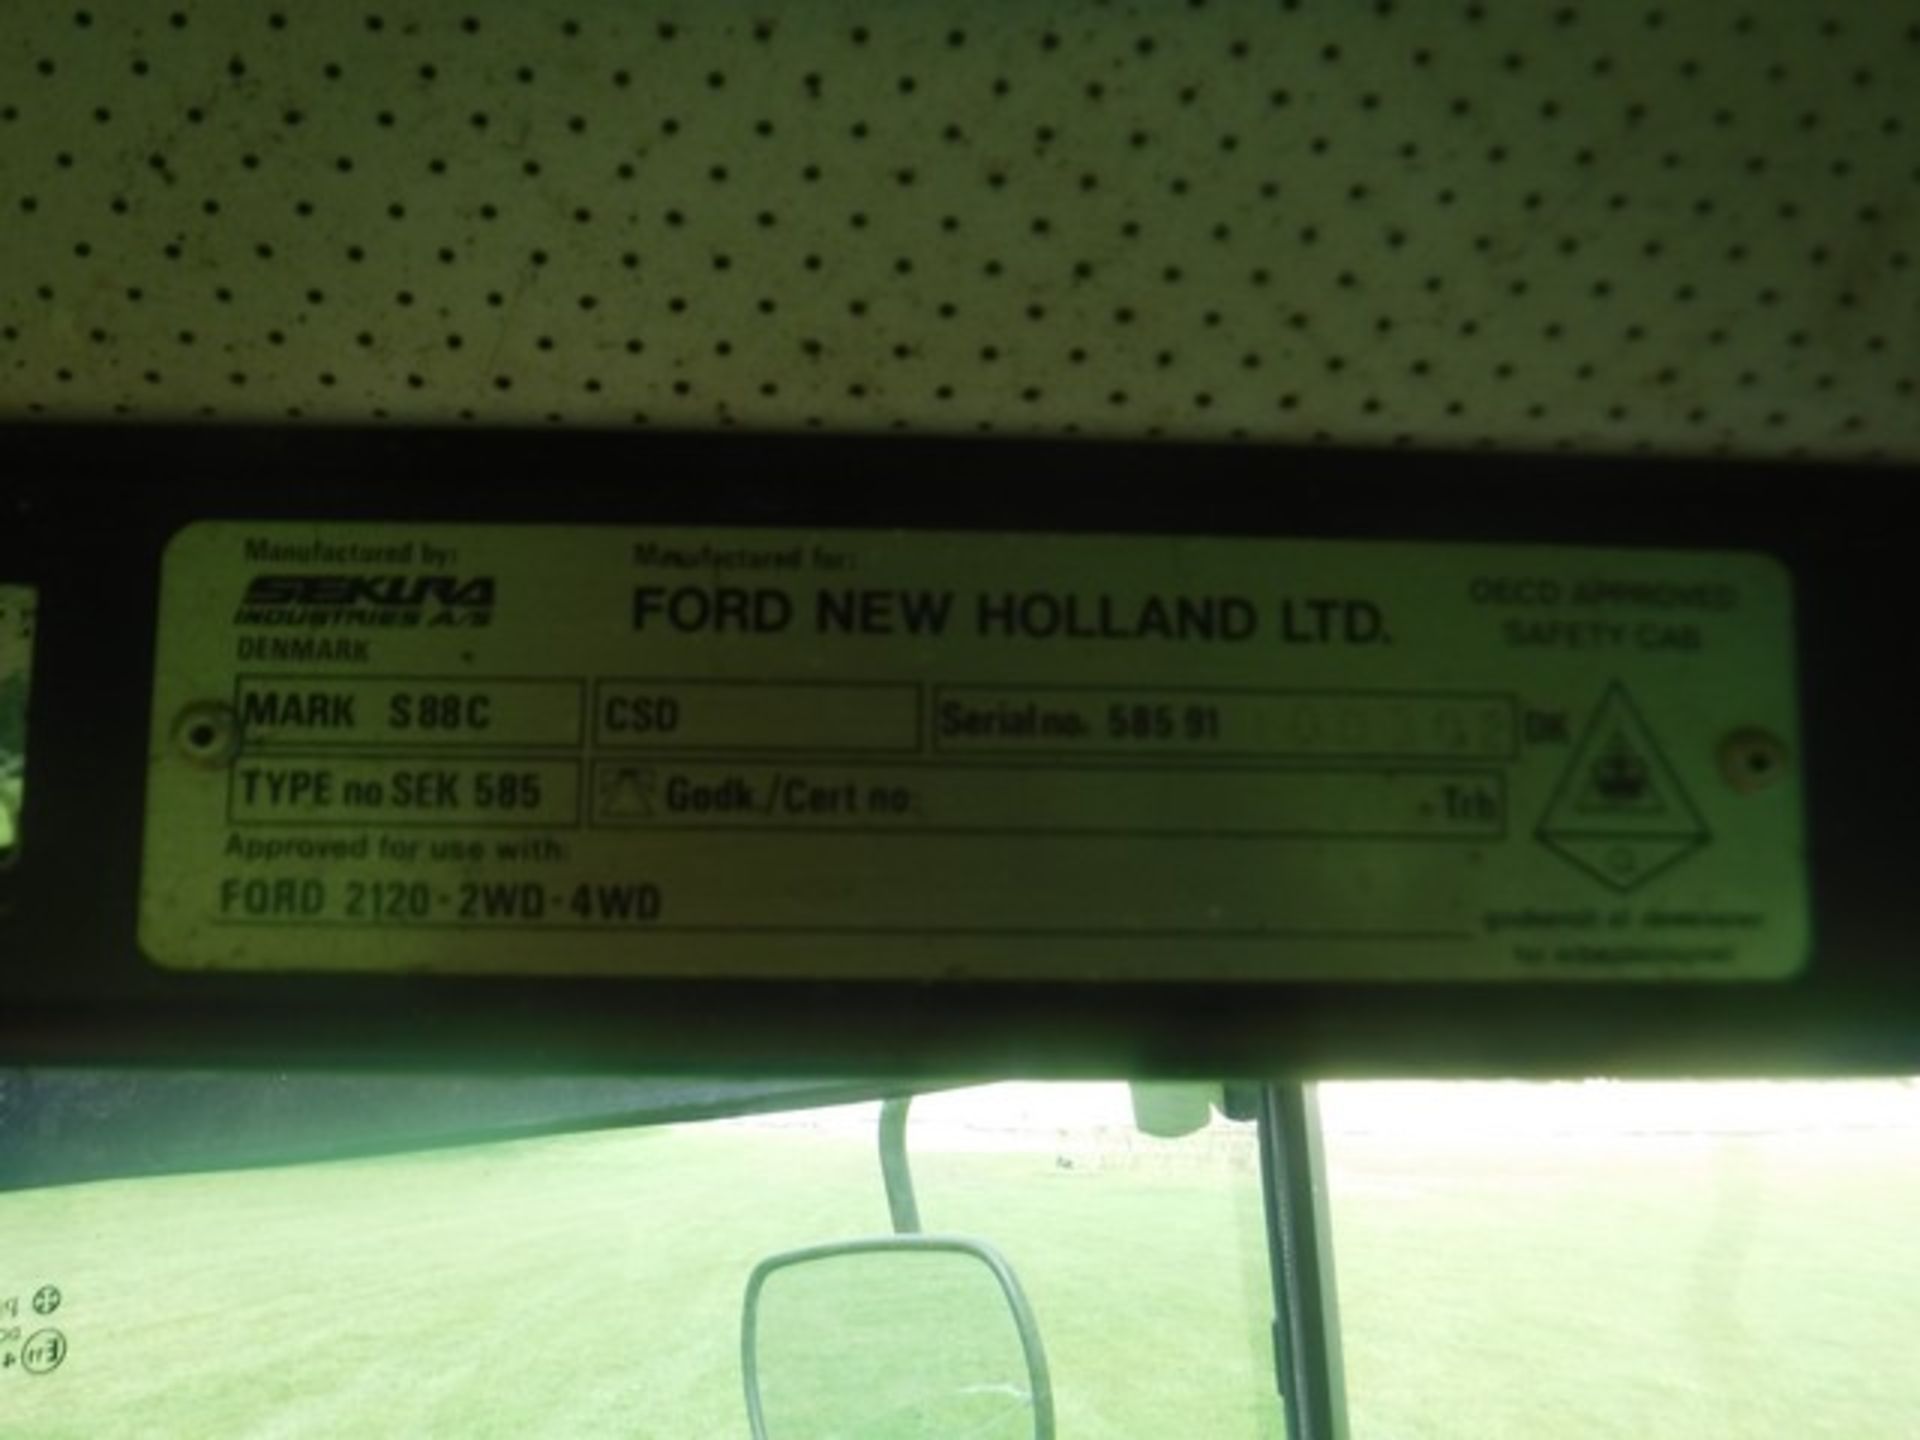 FORD 2120 4WD TRACTOR 1992 - 5917HRS (NOT VERIFIED) - Image 12 of 13